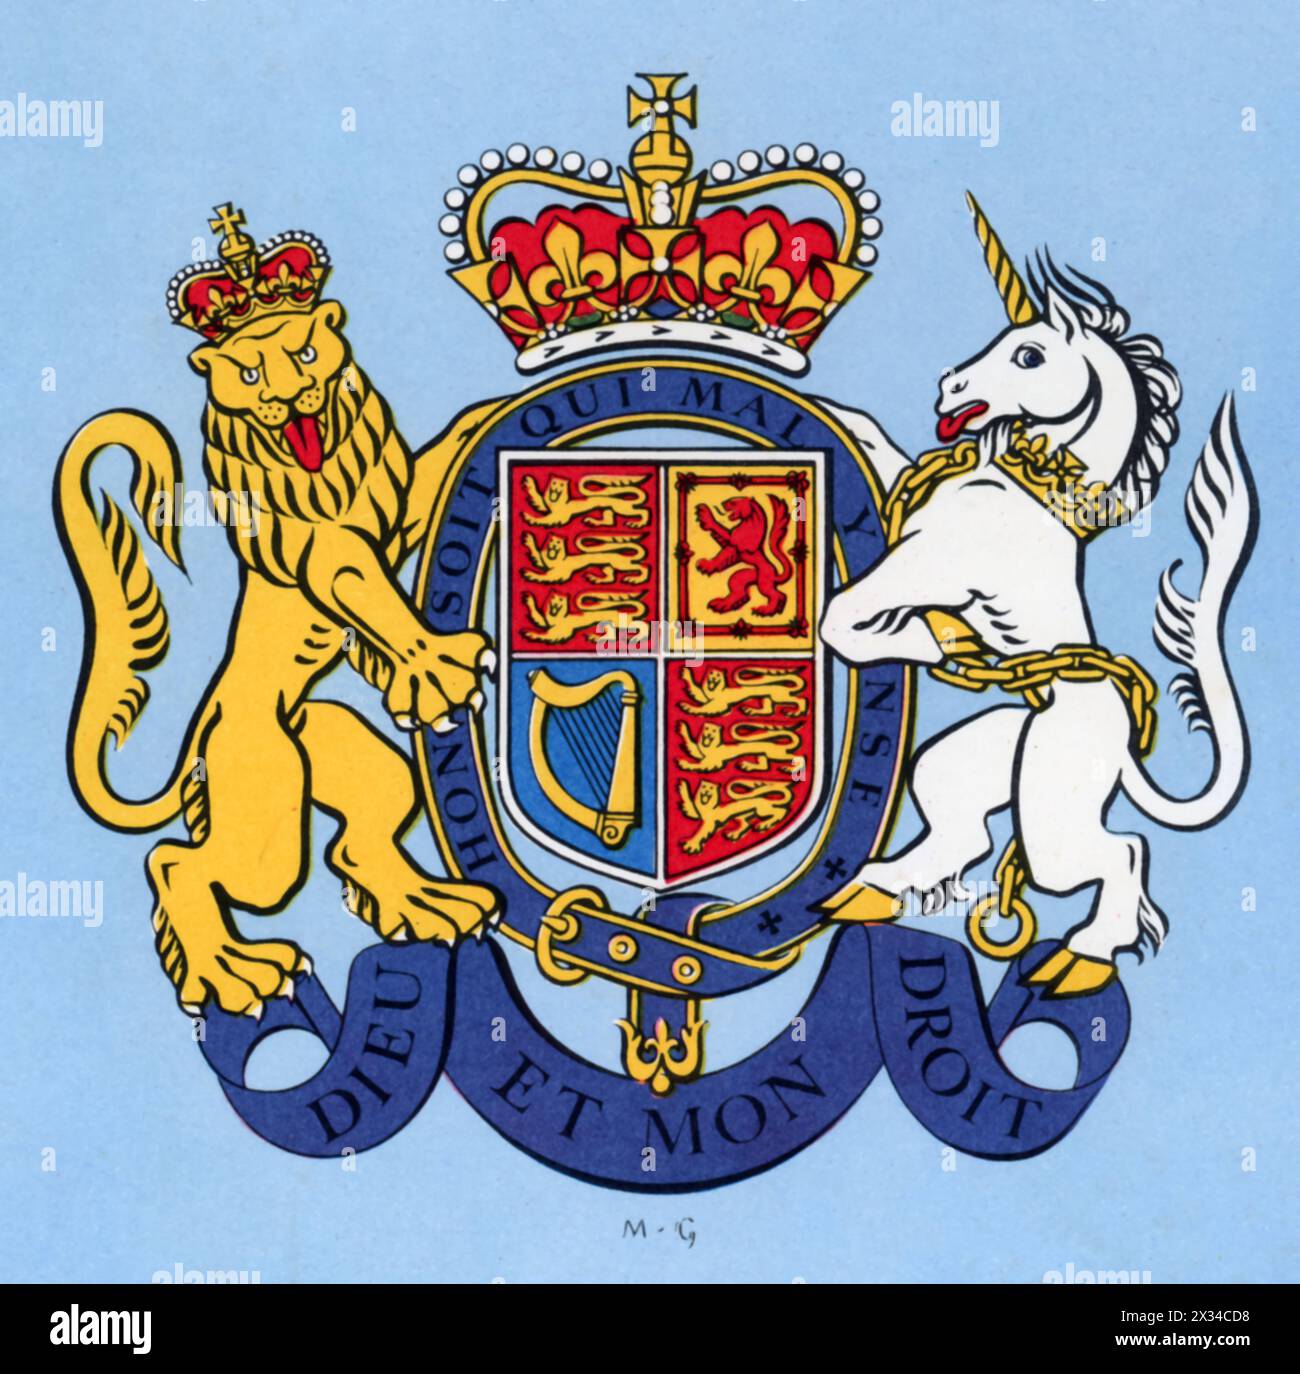 The Coat of Arms of the United Kingdom. The United Kingdom's coat of arms features a shield guarded by a lion, symbolizing England, and a unicorn, representing Scotland. The two mottos Dieu et mon droit' ('God and my right') and 'Honi soit qui mal y pense' ('Shame be to him who thinks evil of it'), which is the motto of the Order of the Garter. Stock Photo